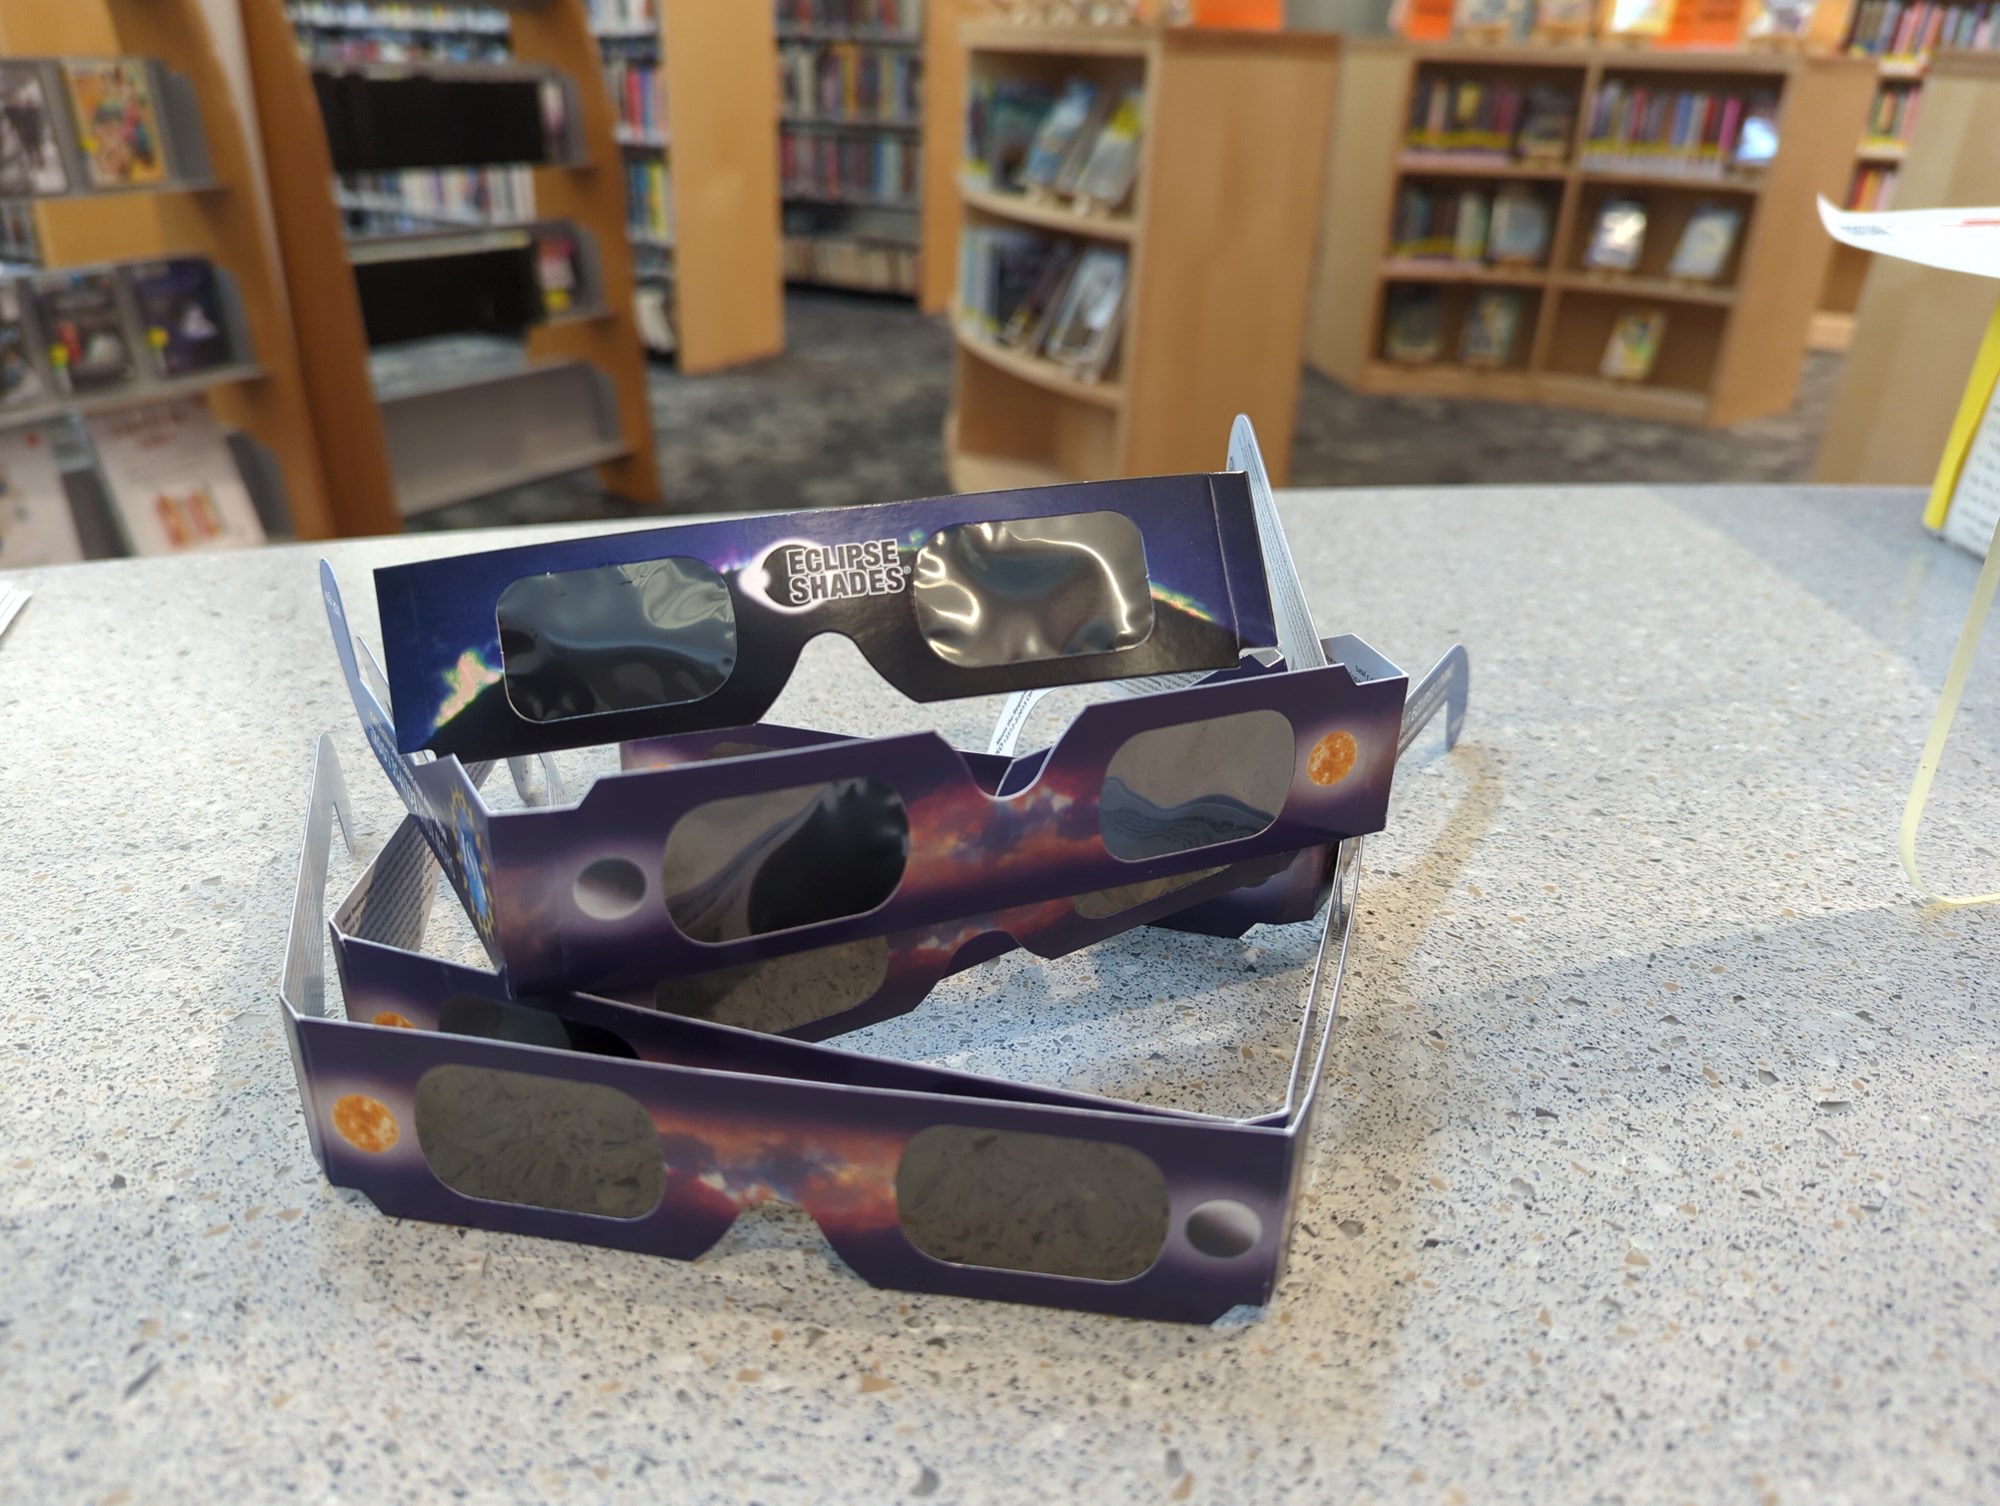 Photograph of a stack of donated eclipse glasses